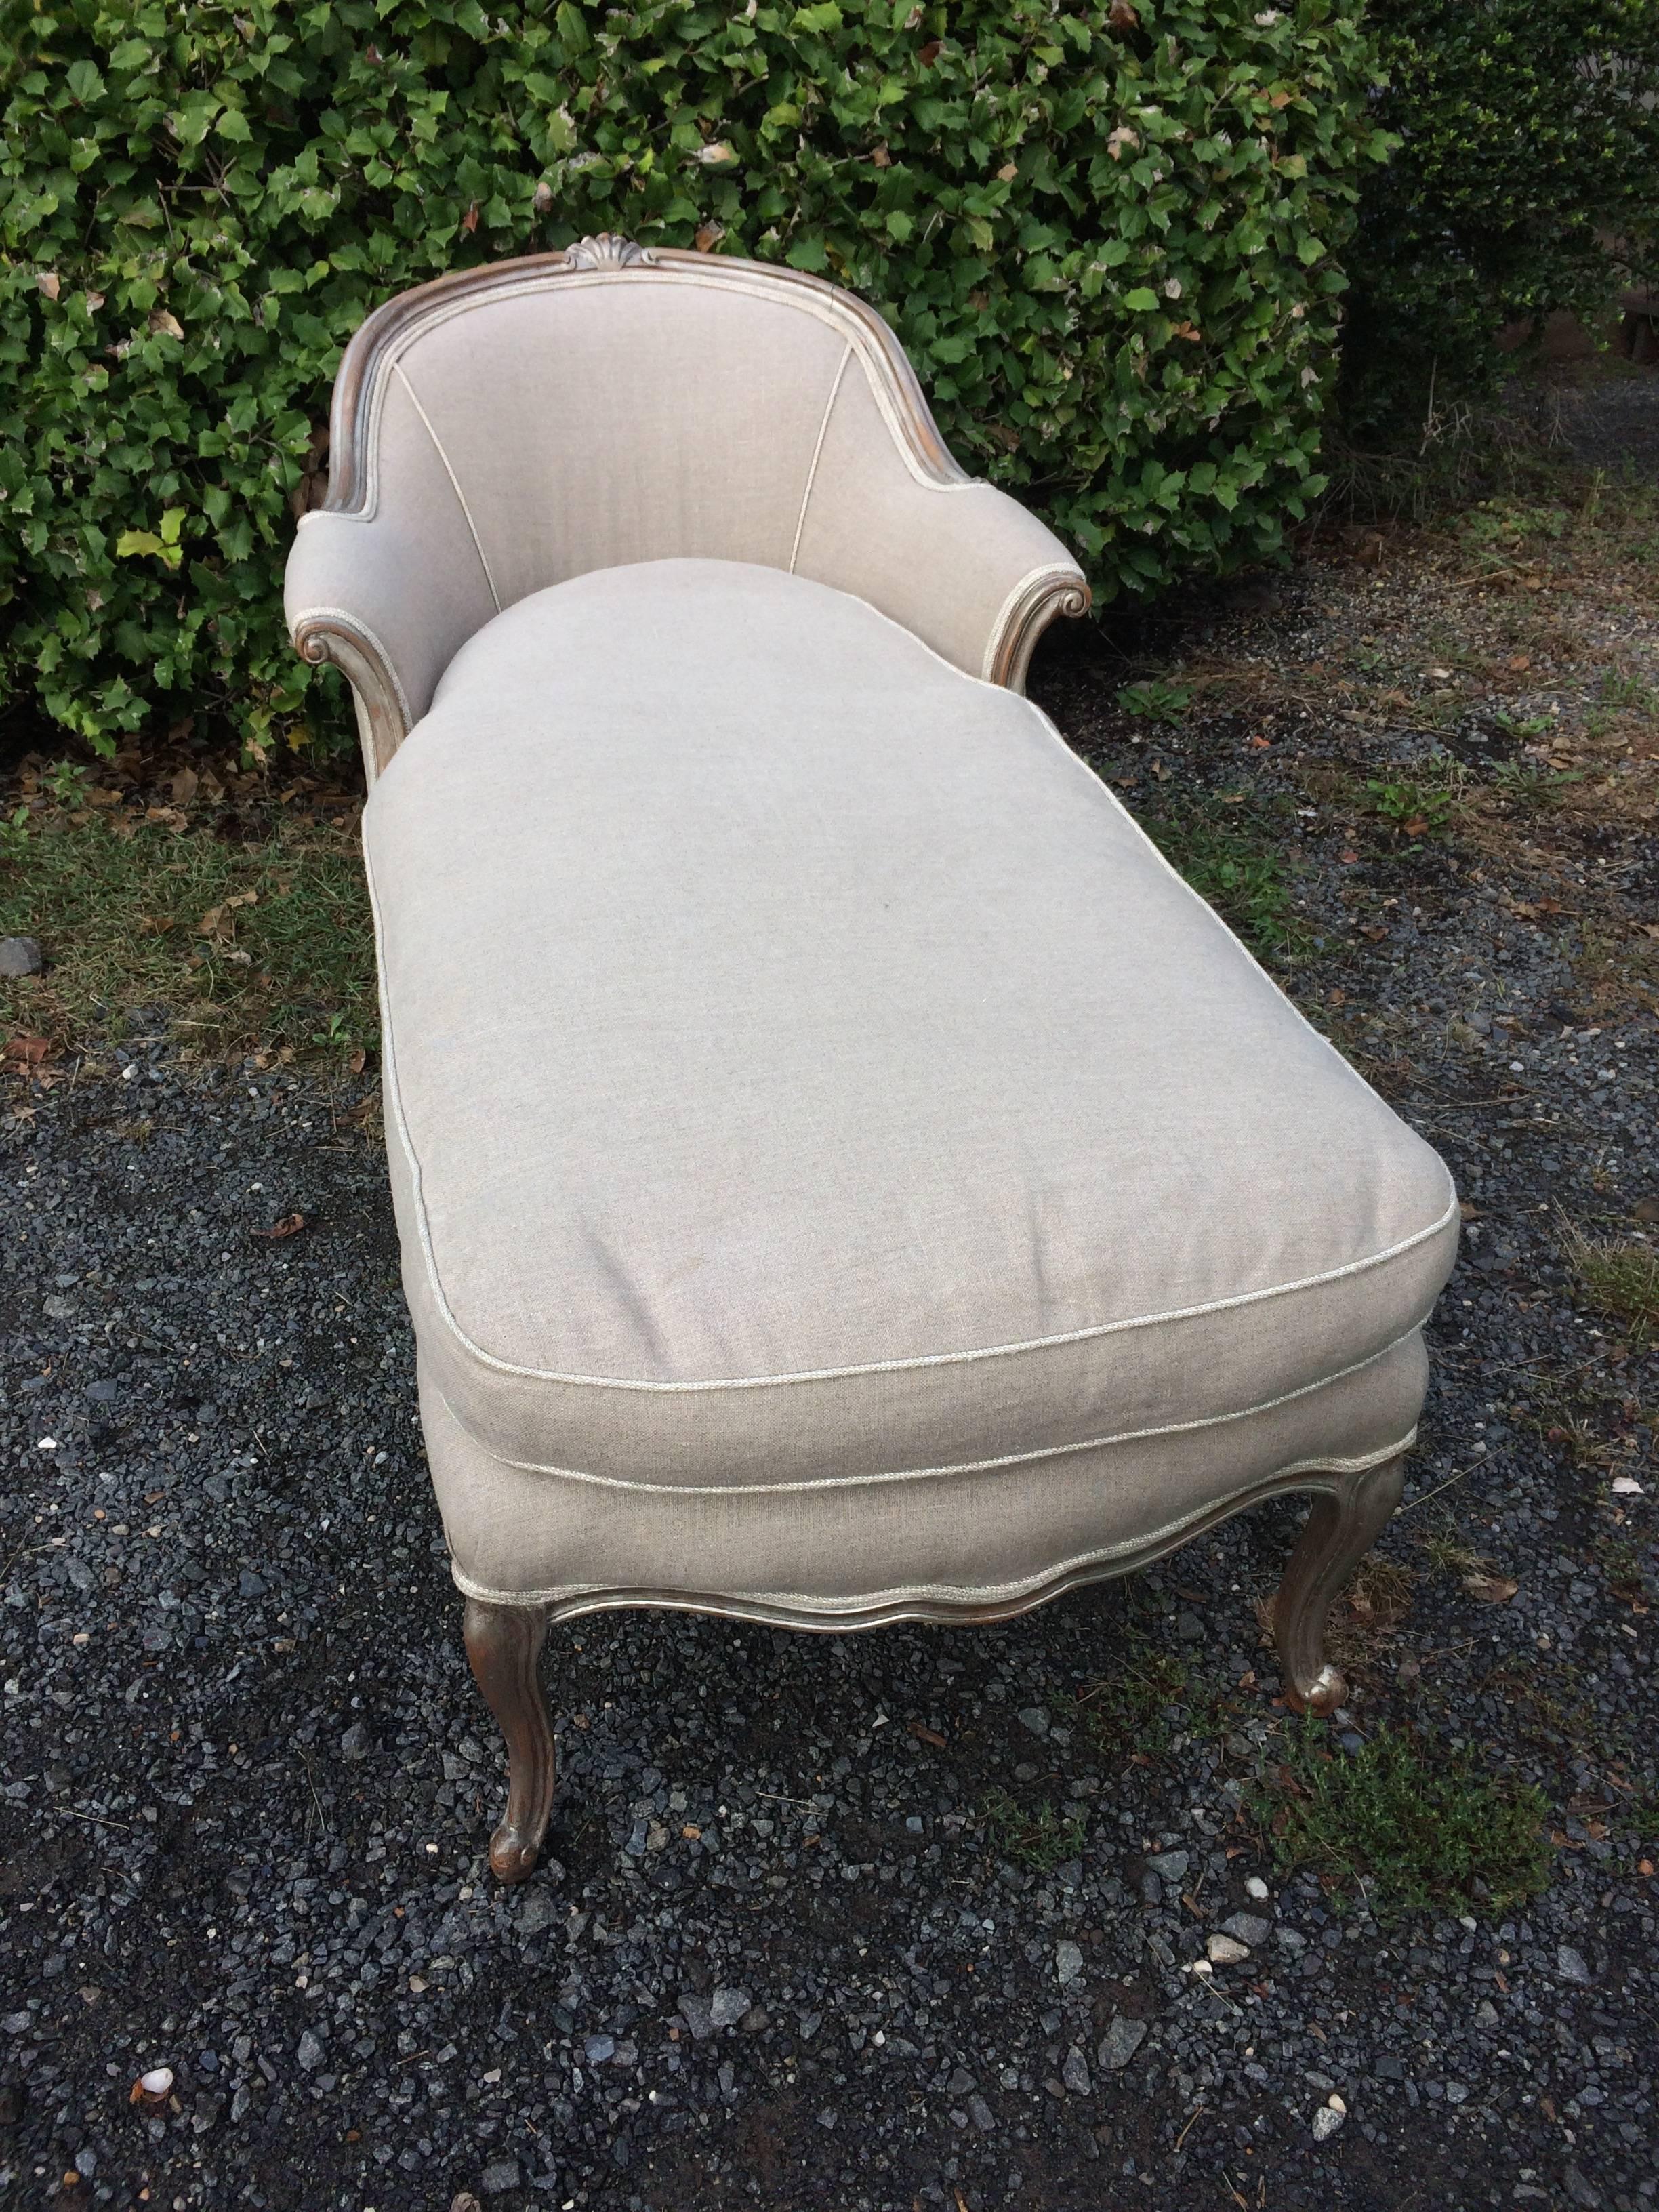 Lovely French 1940s chaise having silver giltwood and carved frame with shell embellishment at the top, upholstered in neutral Belgian linen with a comfy down cushion. Measures: Seat is 53